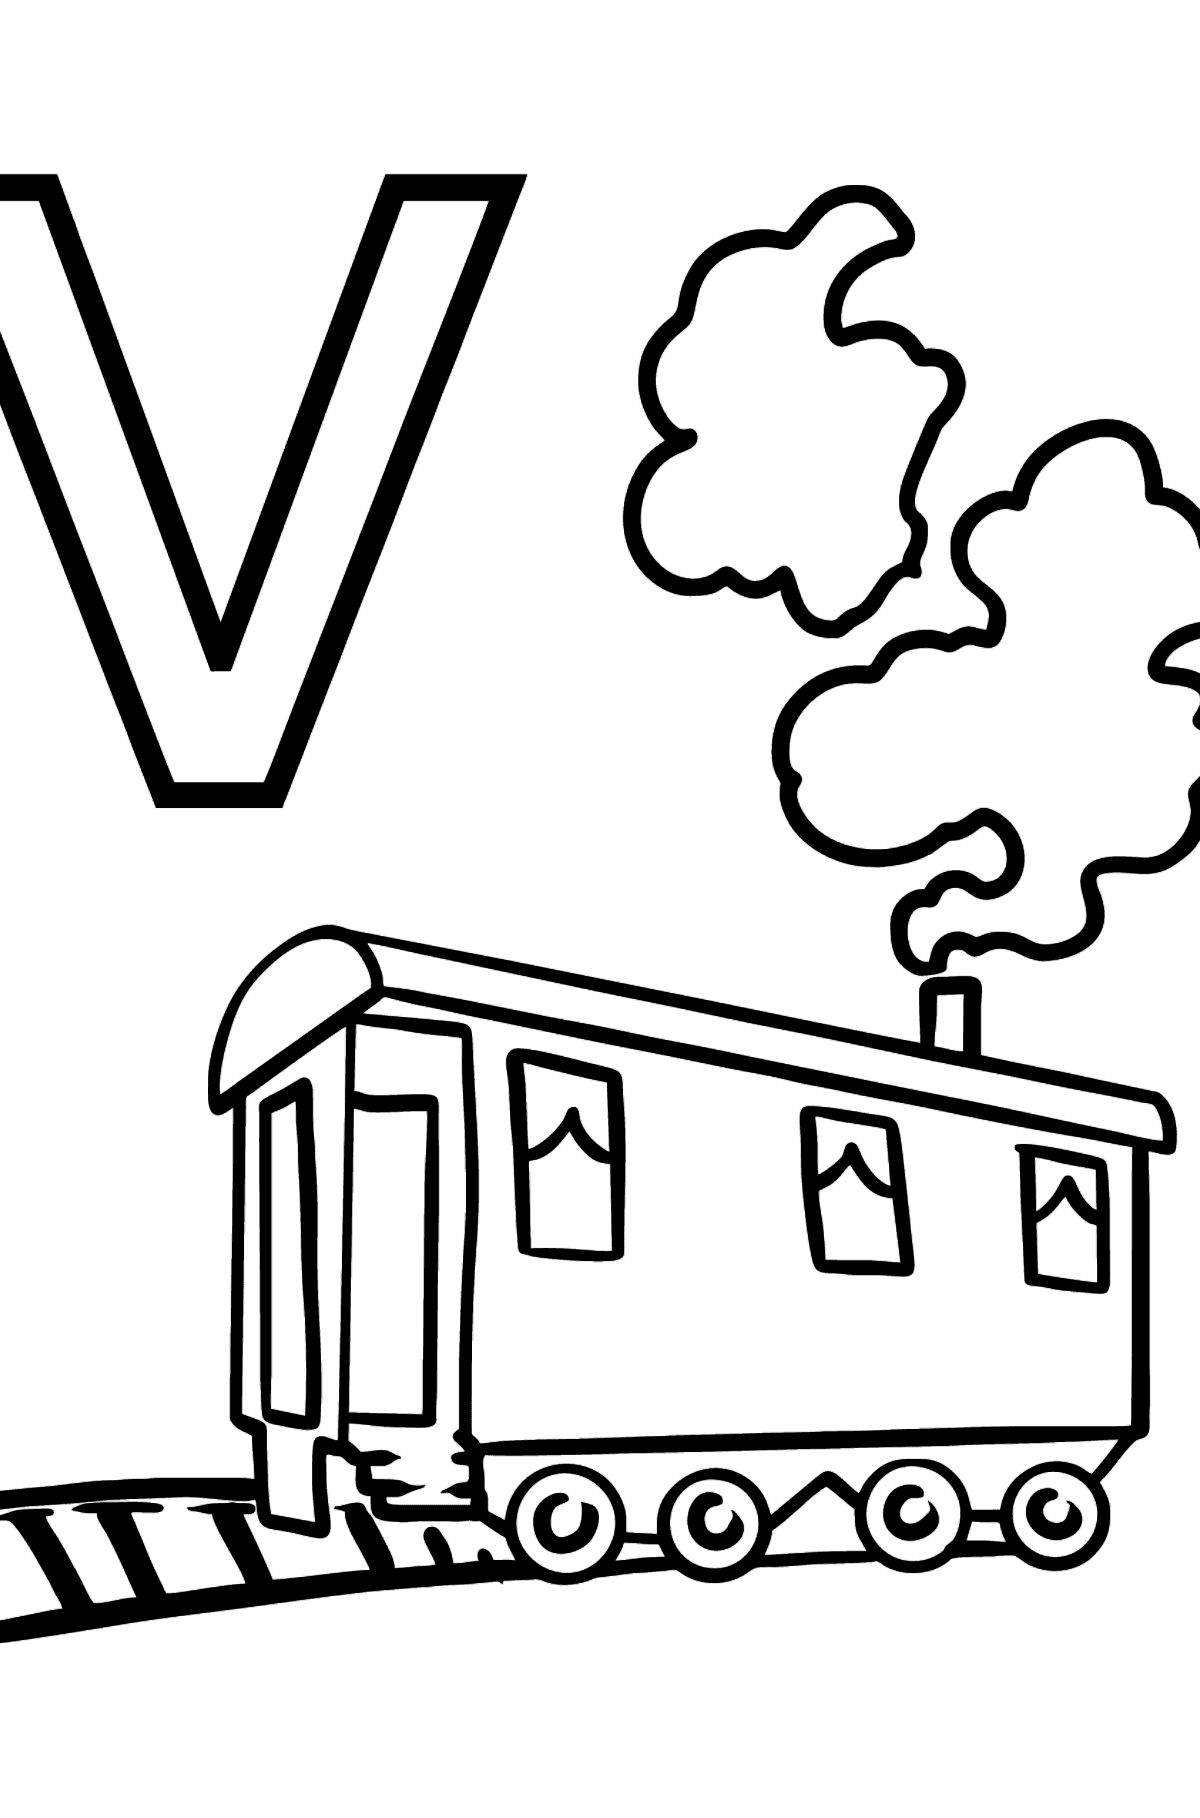 English Letter V coloring pages - VAGON - Coloring Pages for Kids